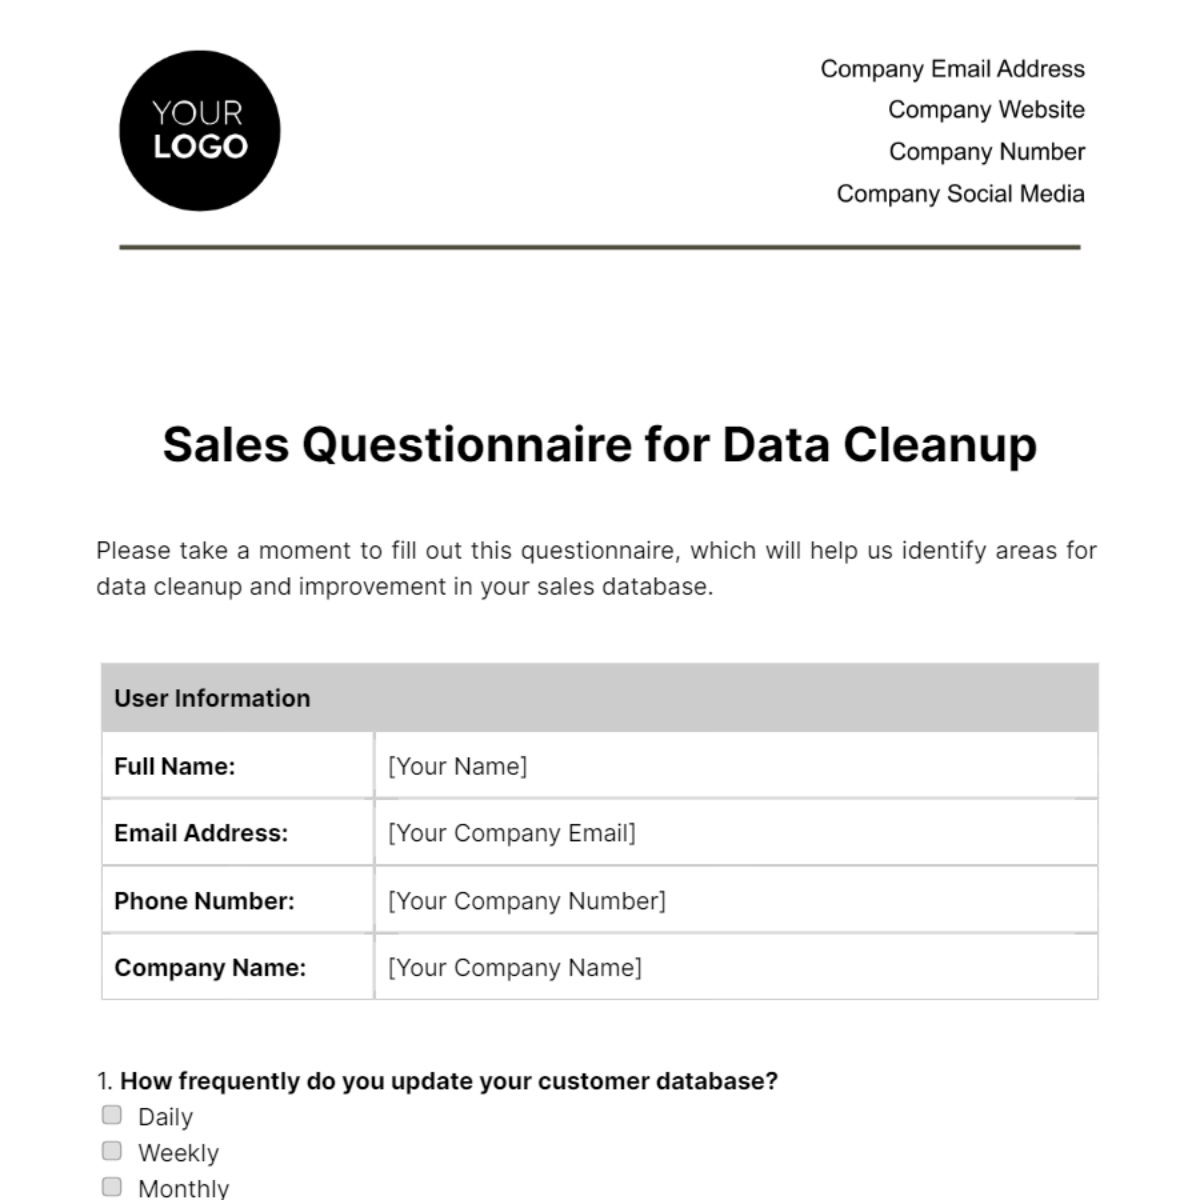 Free Sales Questionnaire for Data Cleanup Template